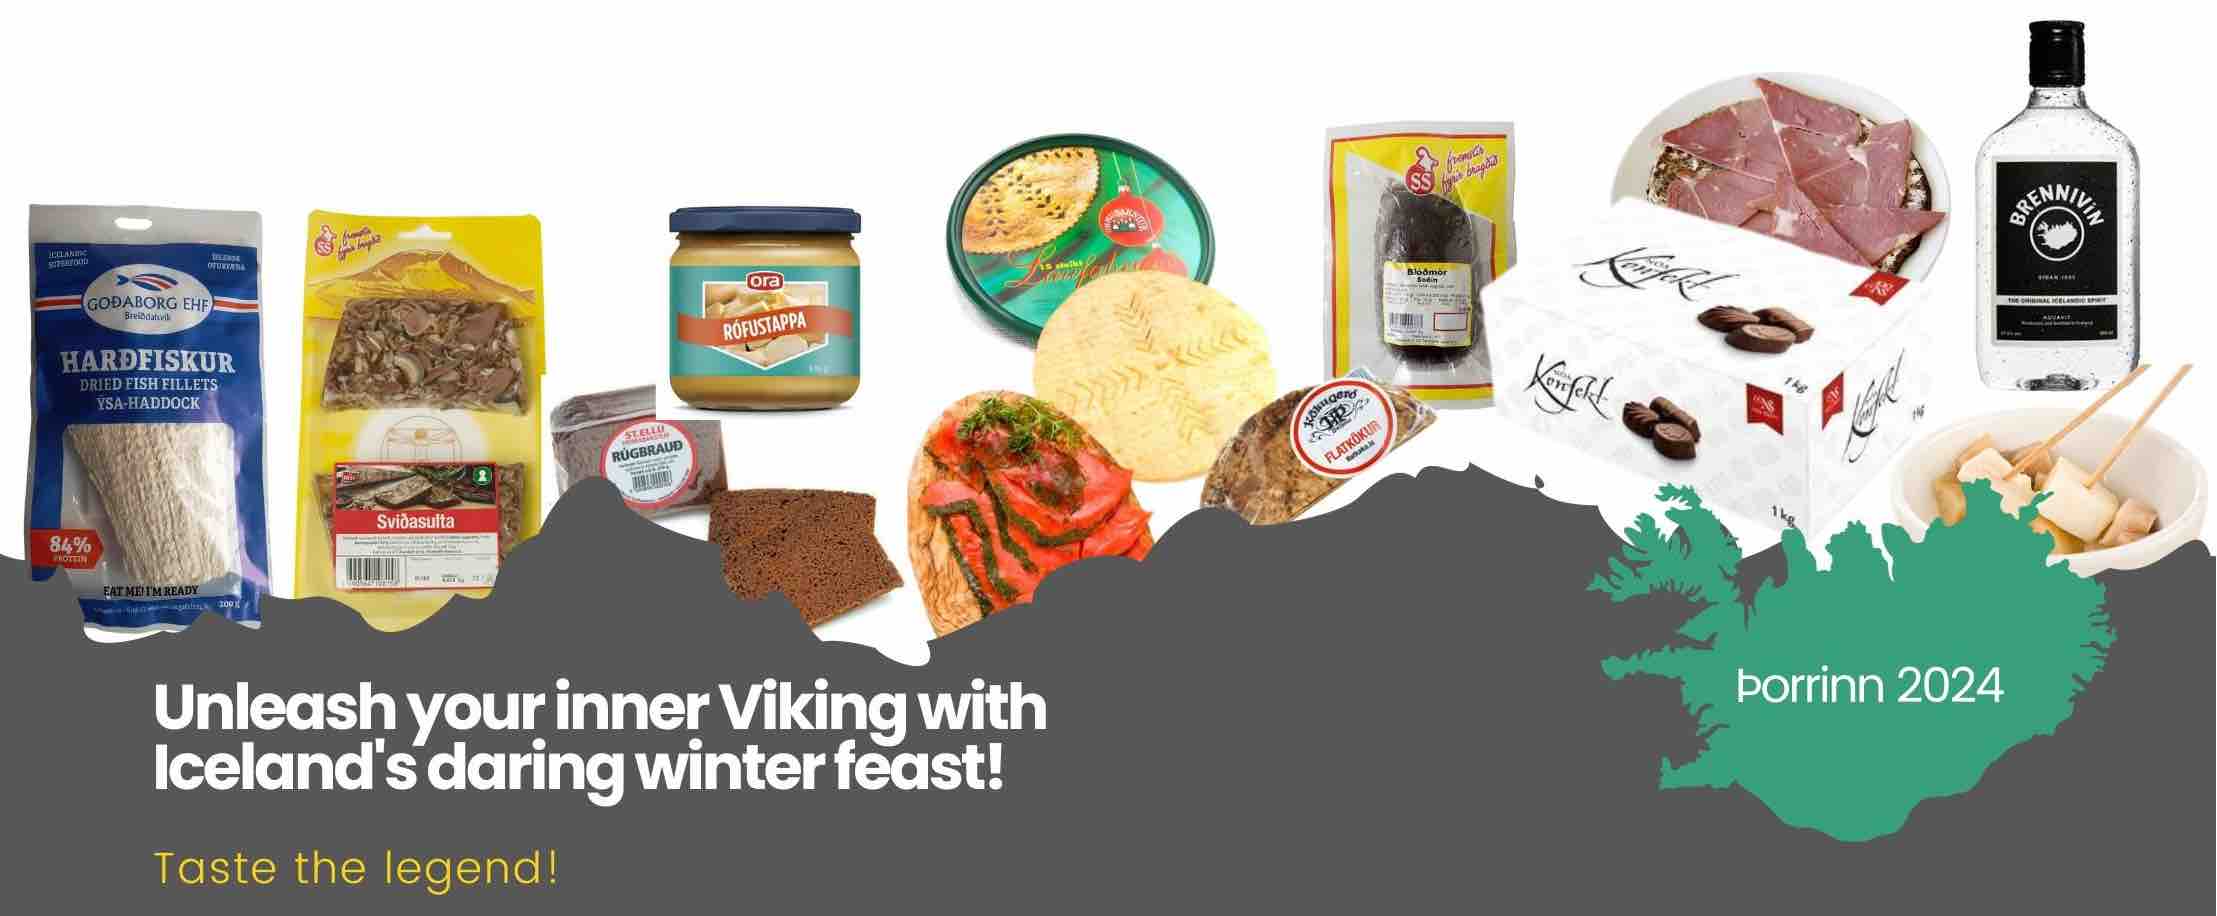 Products available for Þorinn. - TopIceland